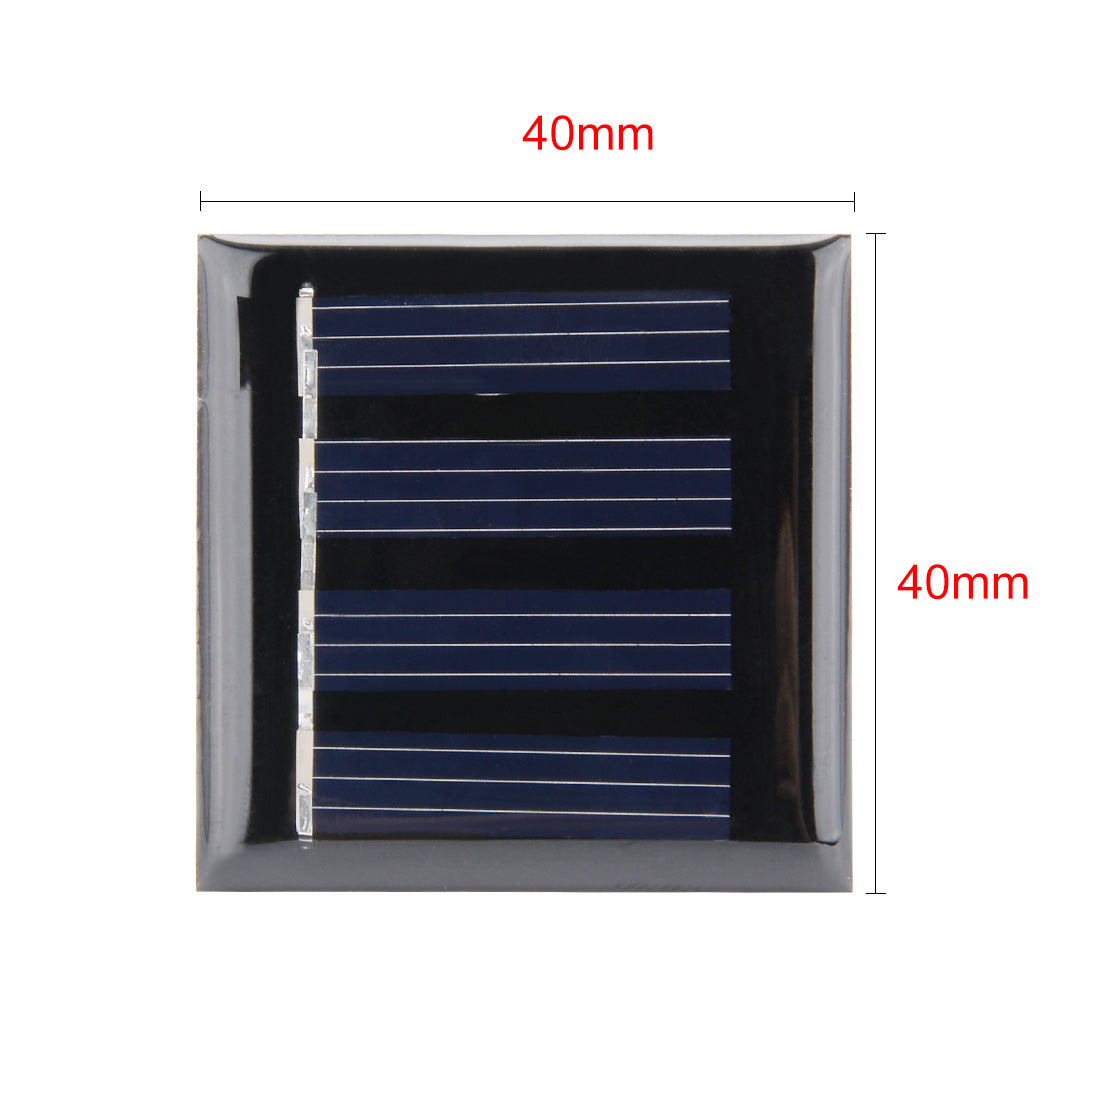 uxcell Uxcell 5Pcs 2V 40mA Poly Mini Solar Cell Panel Module DIY for Light Toys Charger 40mm x 40mm